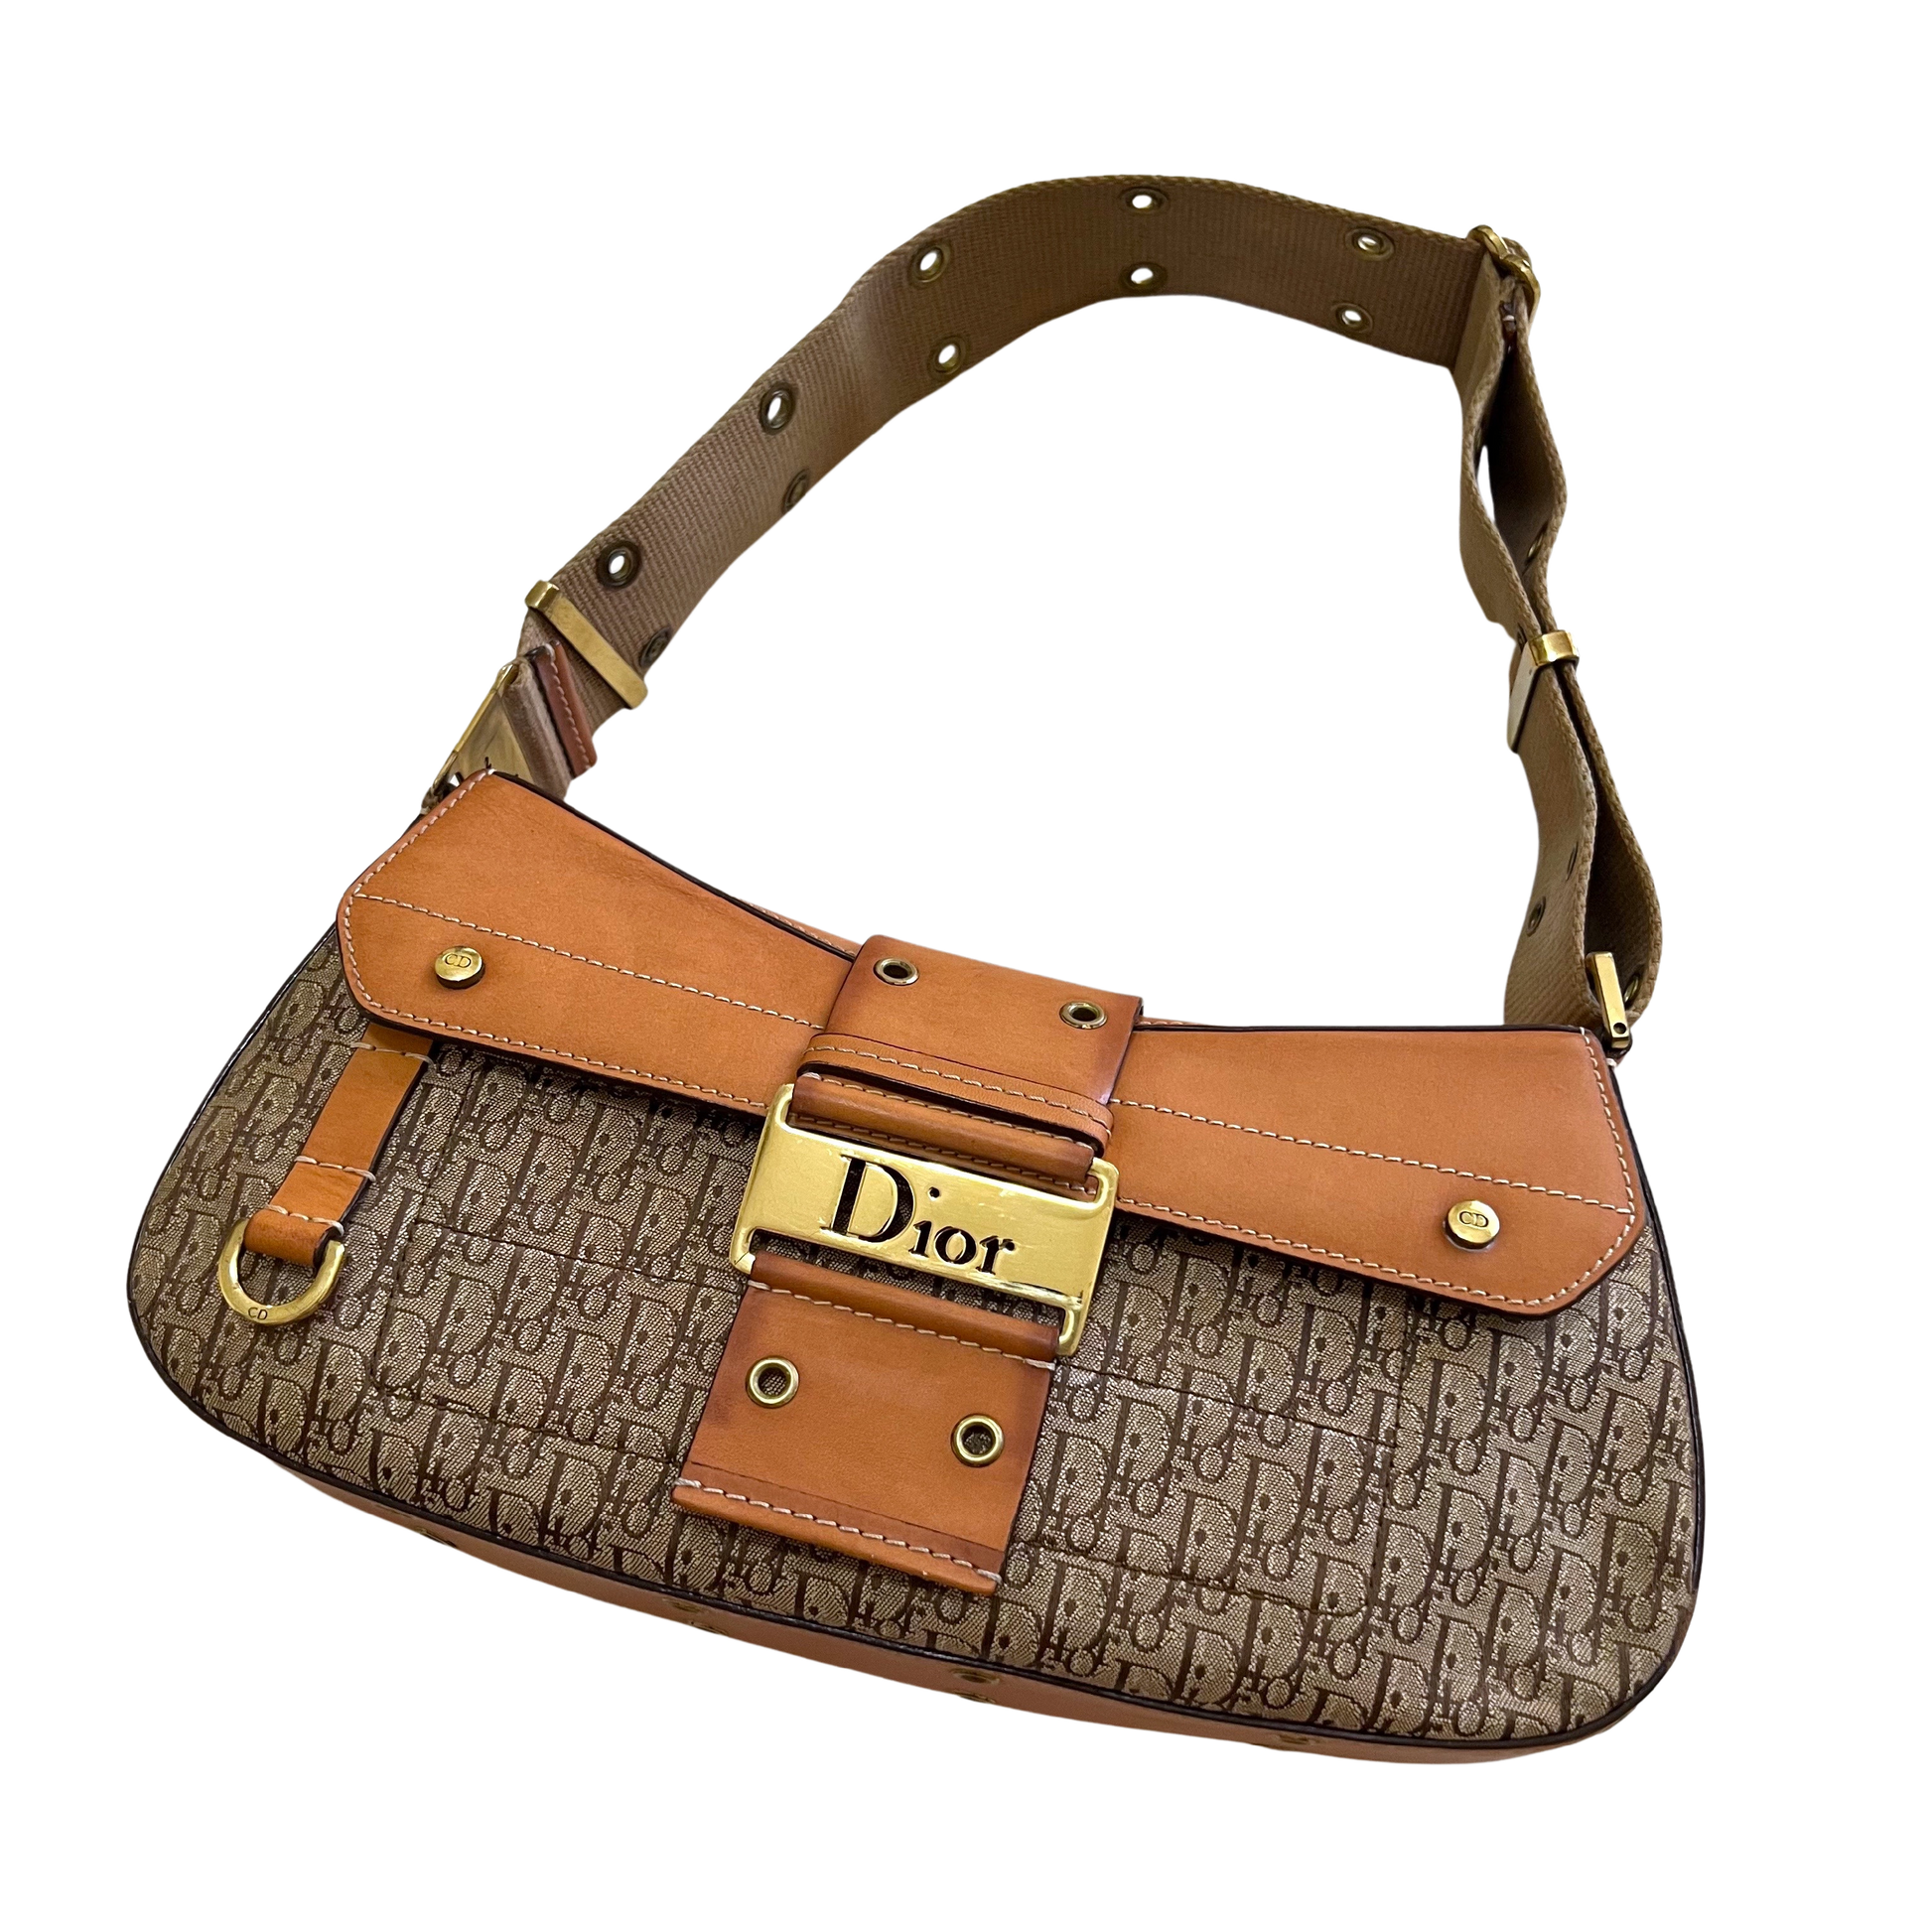 Archive Christian Dior Columbus bag, excellent vintage condition, priced at  $1550